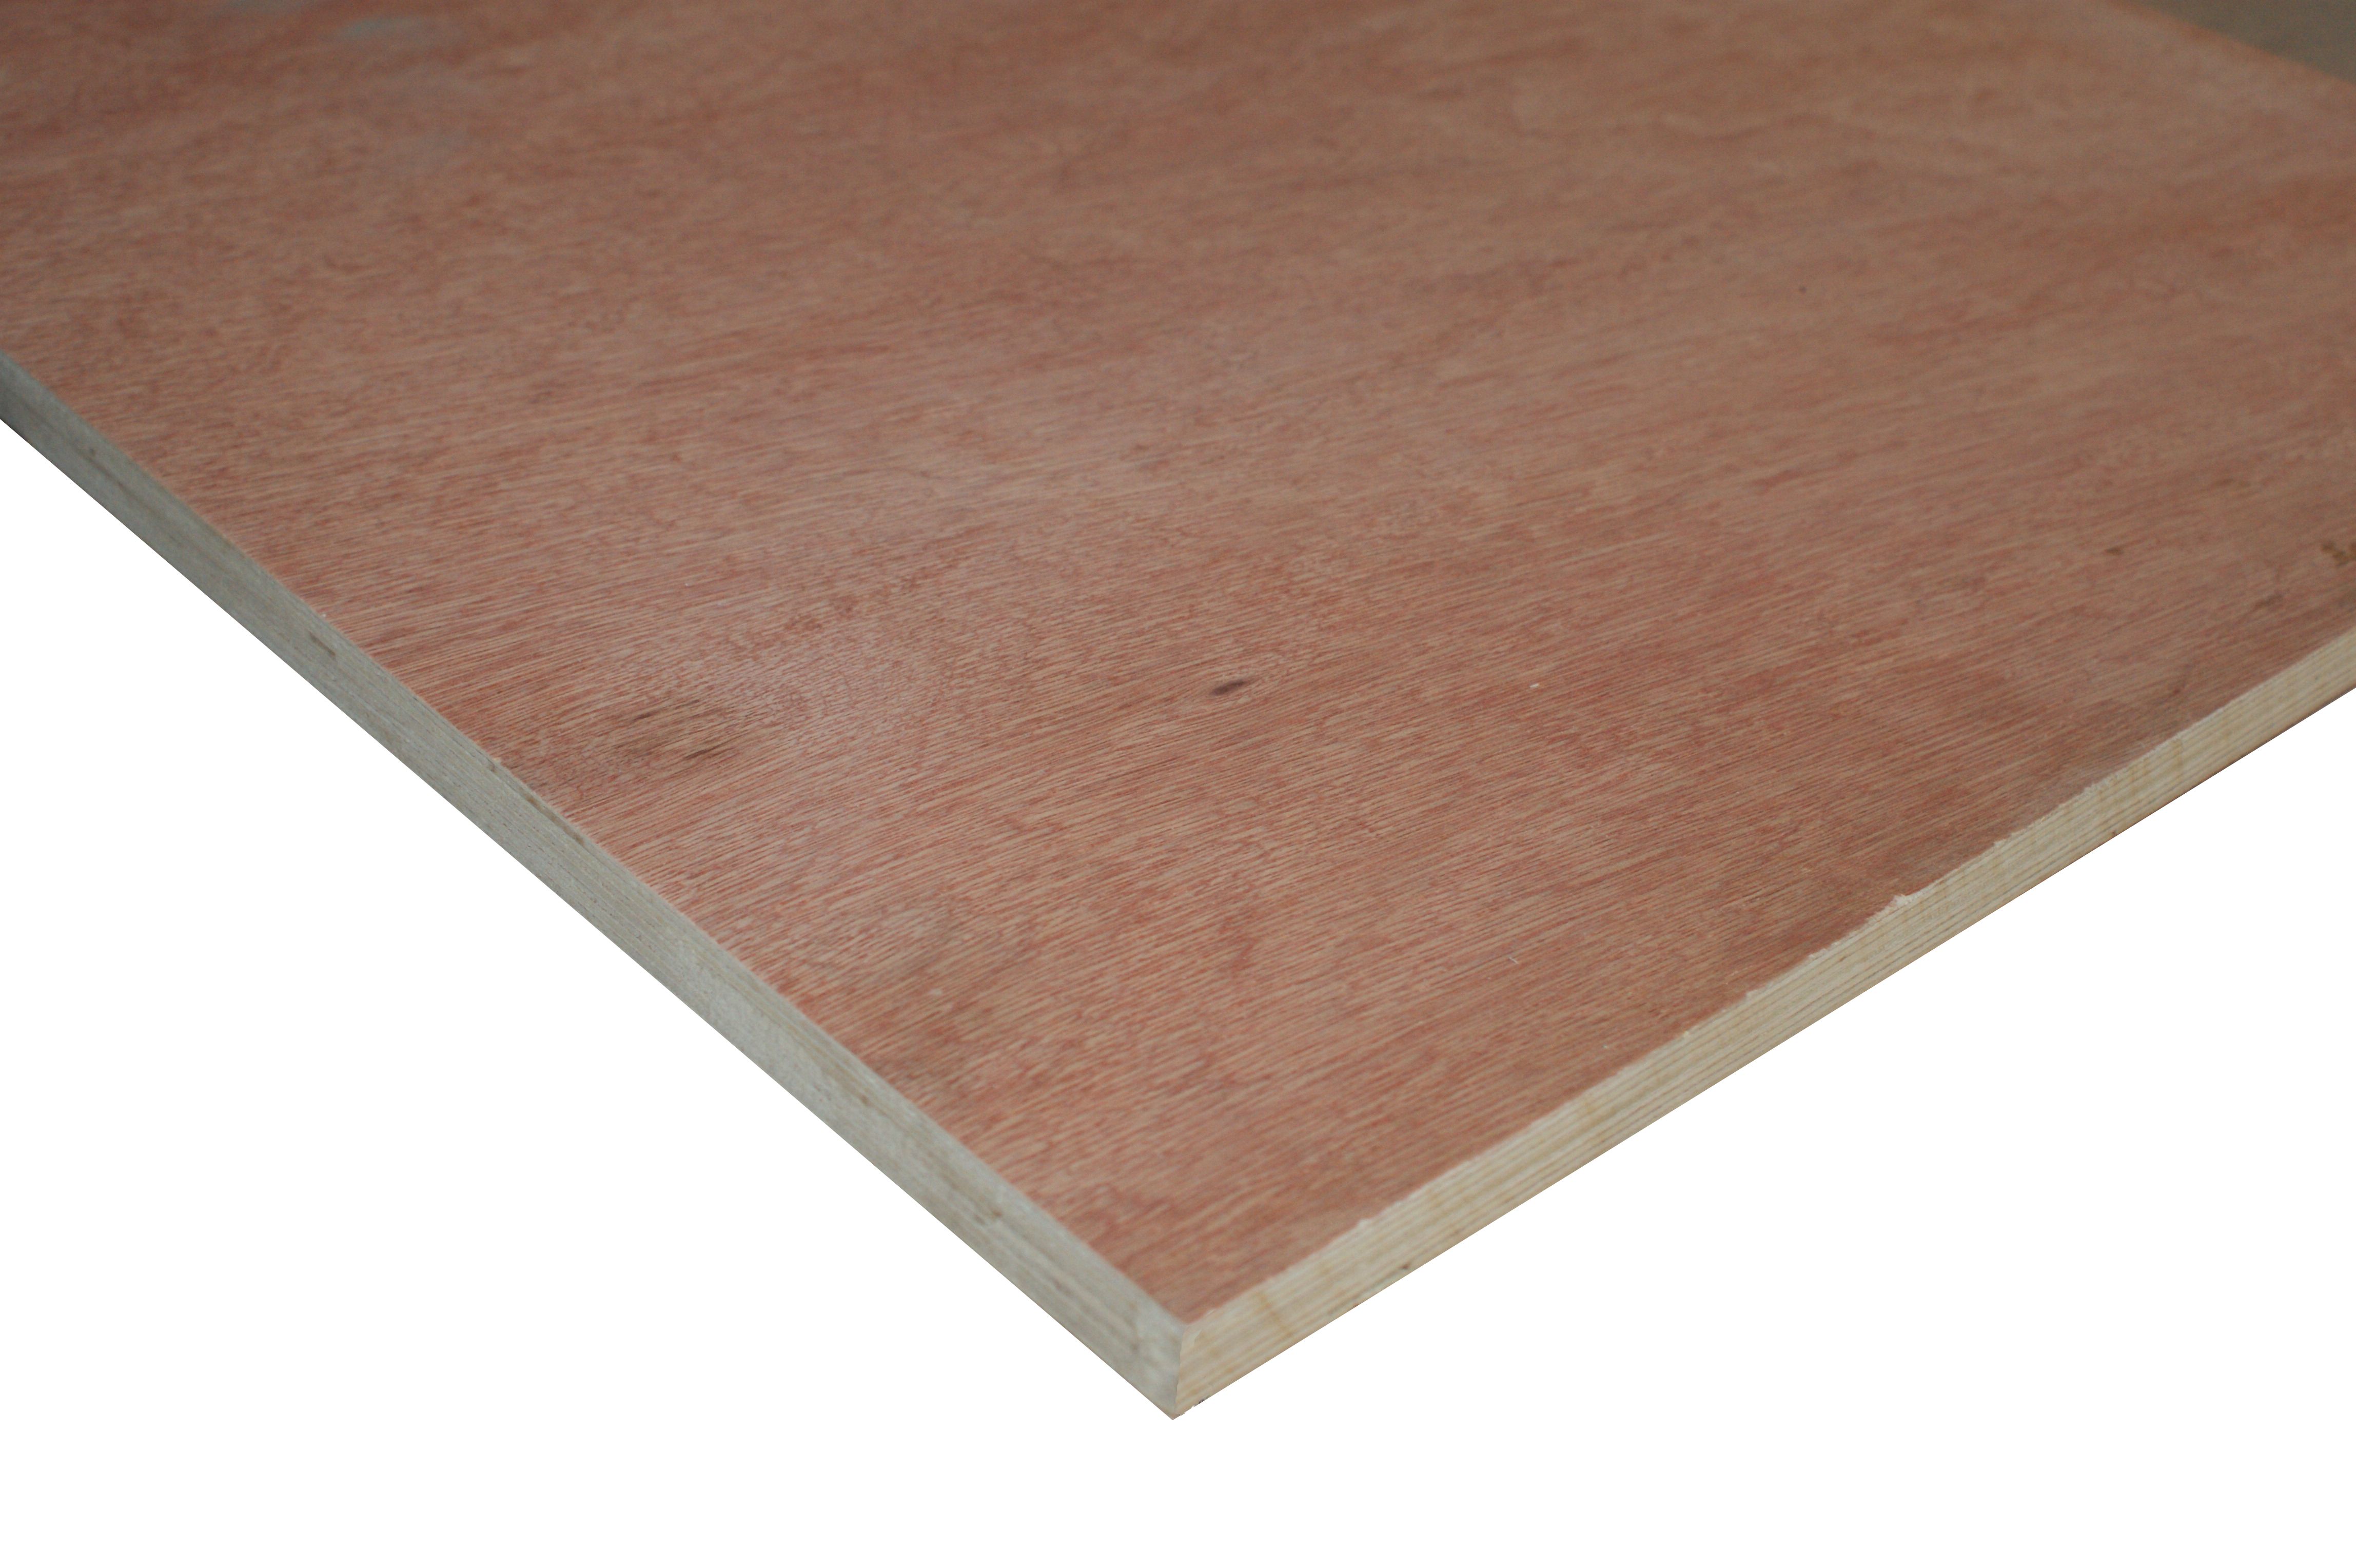 Non-Structural Hardwood Plywood Sheet - 18 x 1220 x 2440mm